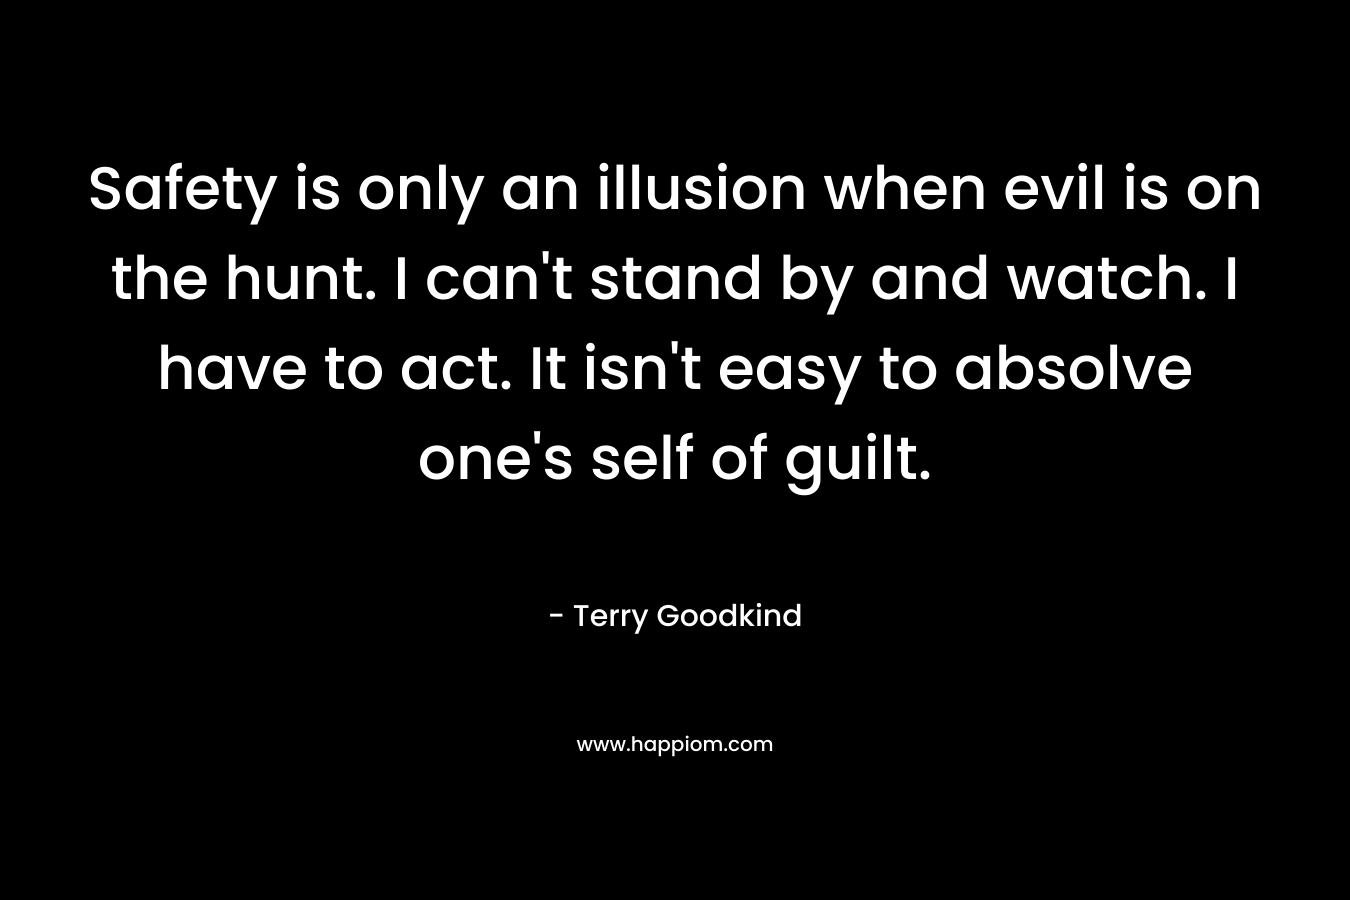 Safety is only an illusion when evil is on the hunt. I can’t stand by and watch. I have to act. It isn’t easy to absolve one’s self of guilt. – Terry Goodkind